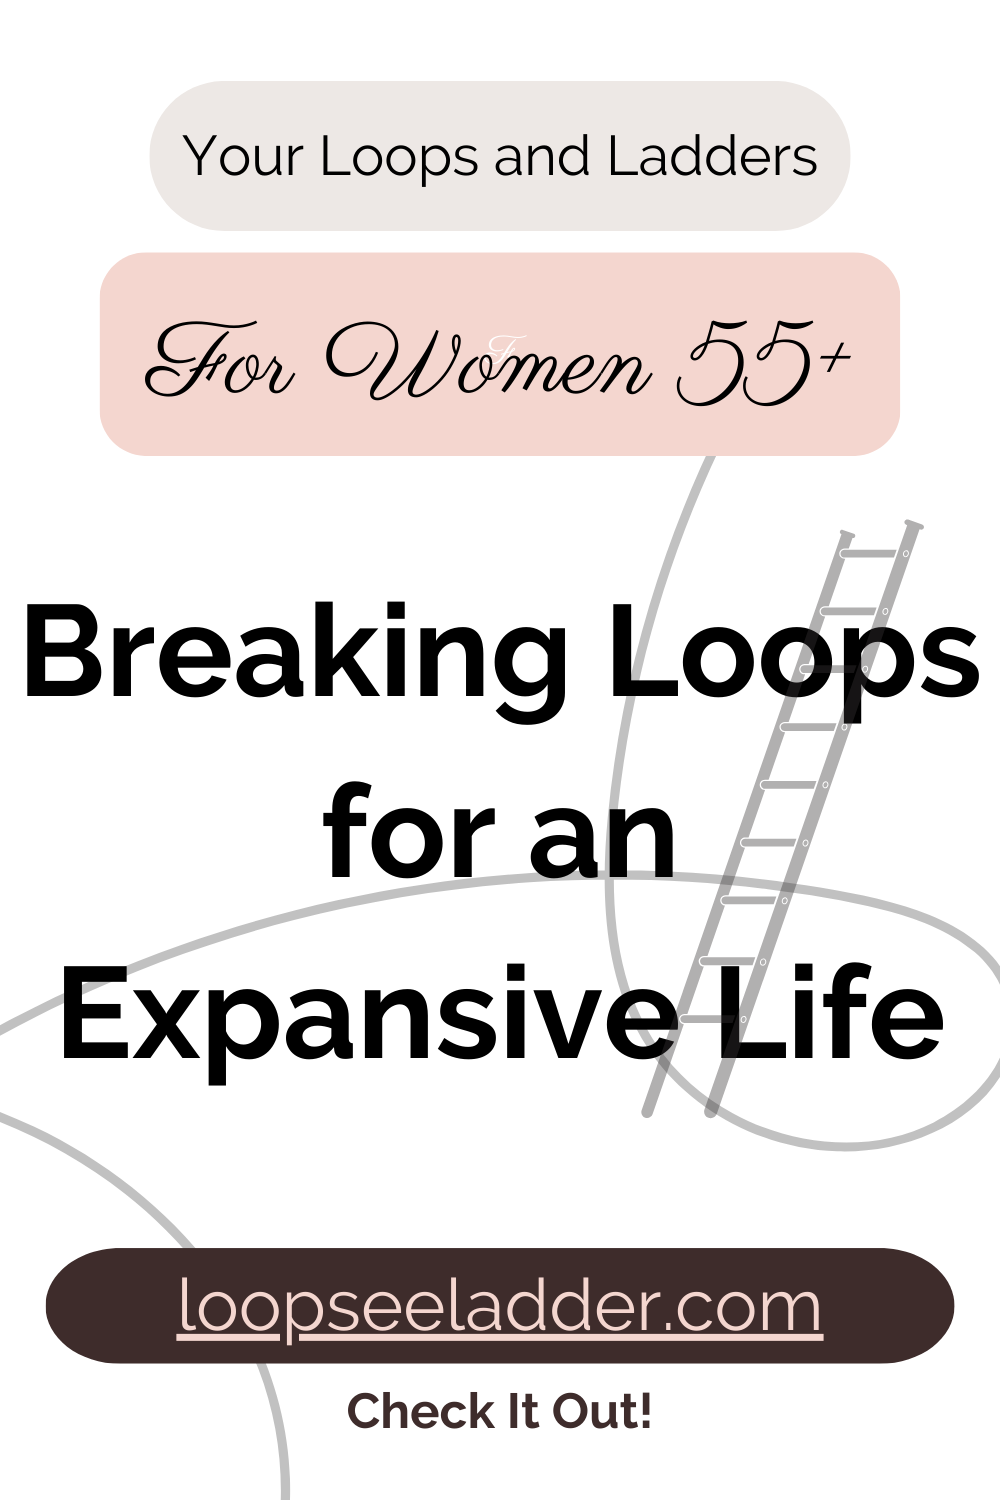 Breaking out of Life's Loops: How Women 55+ Can Create Expansive Lives with Intentionality